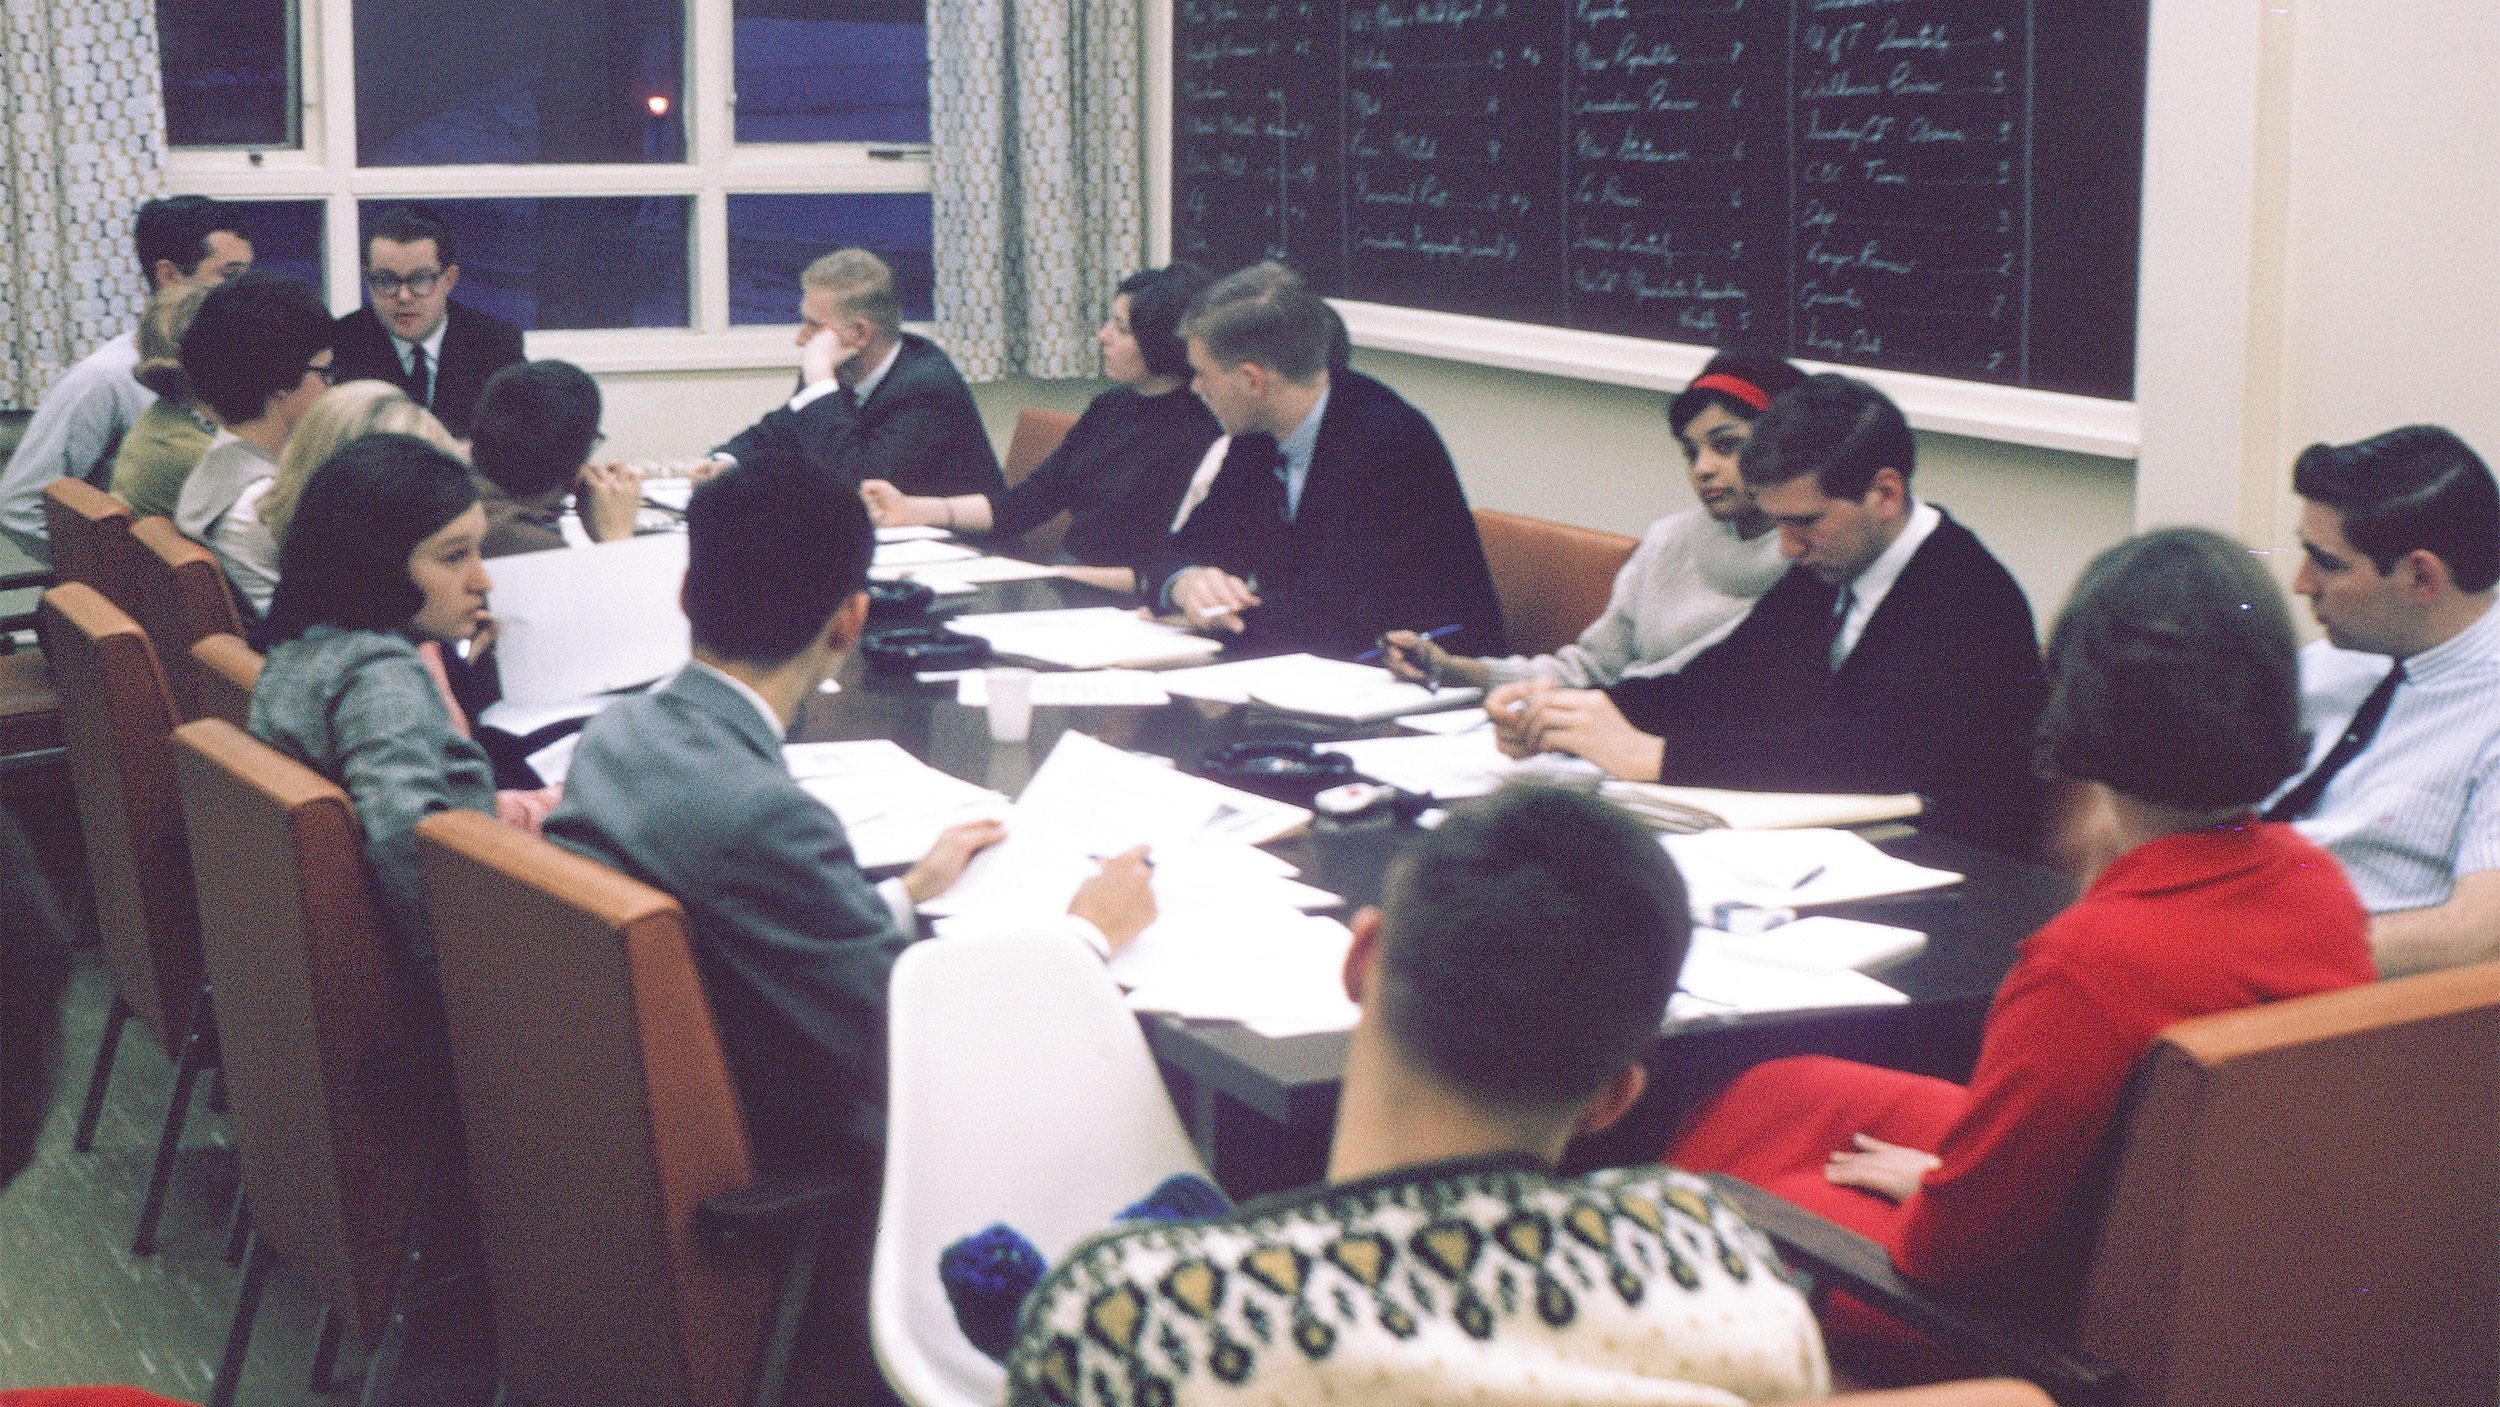 1960s students sit around a board room table